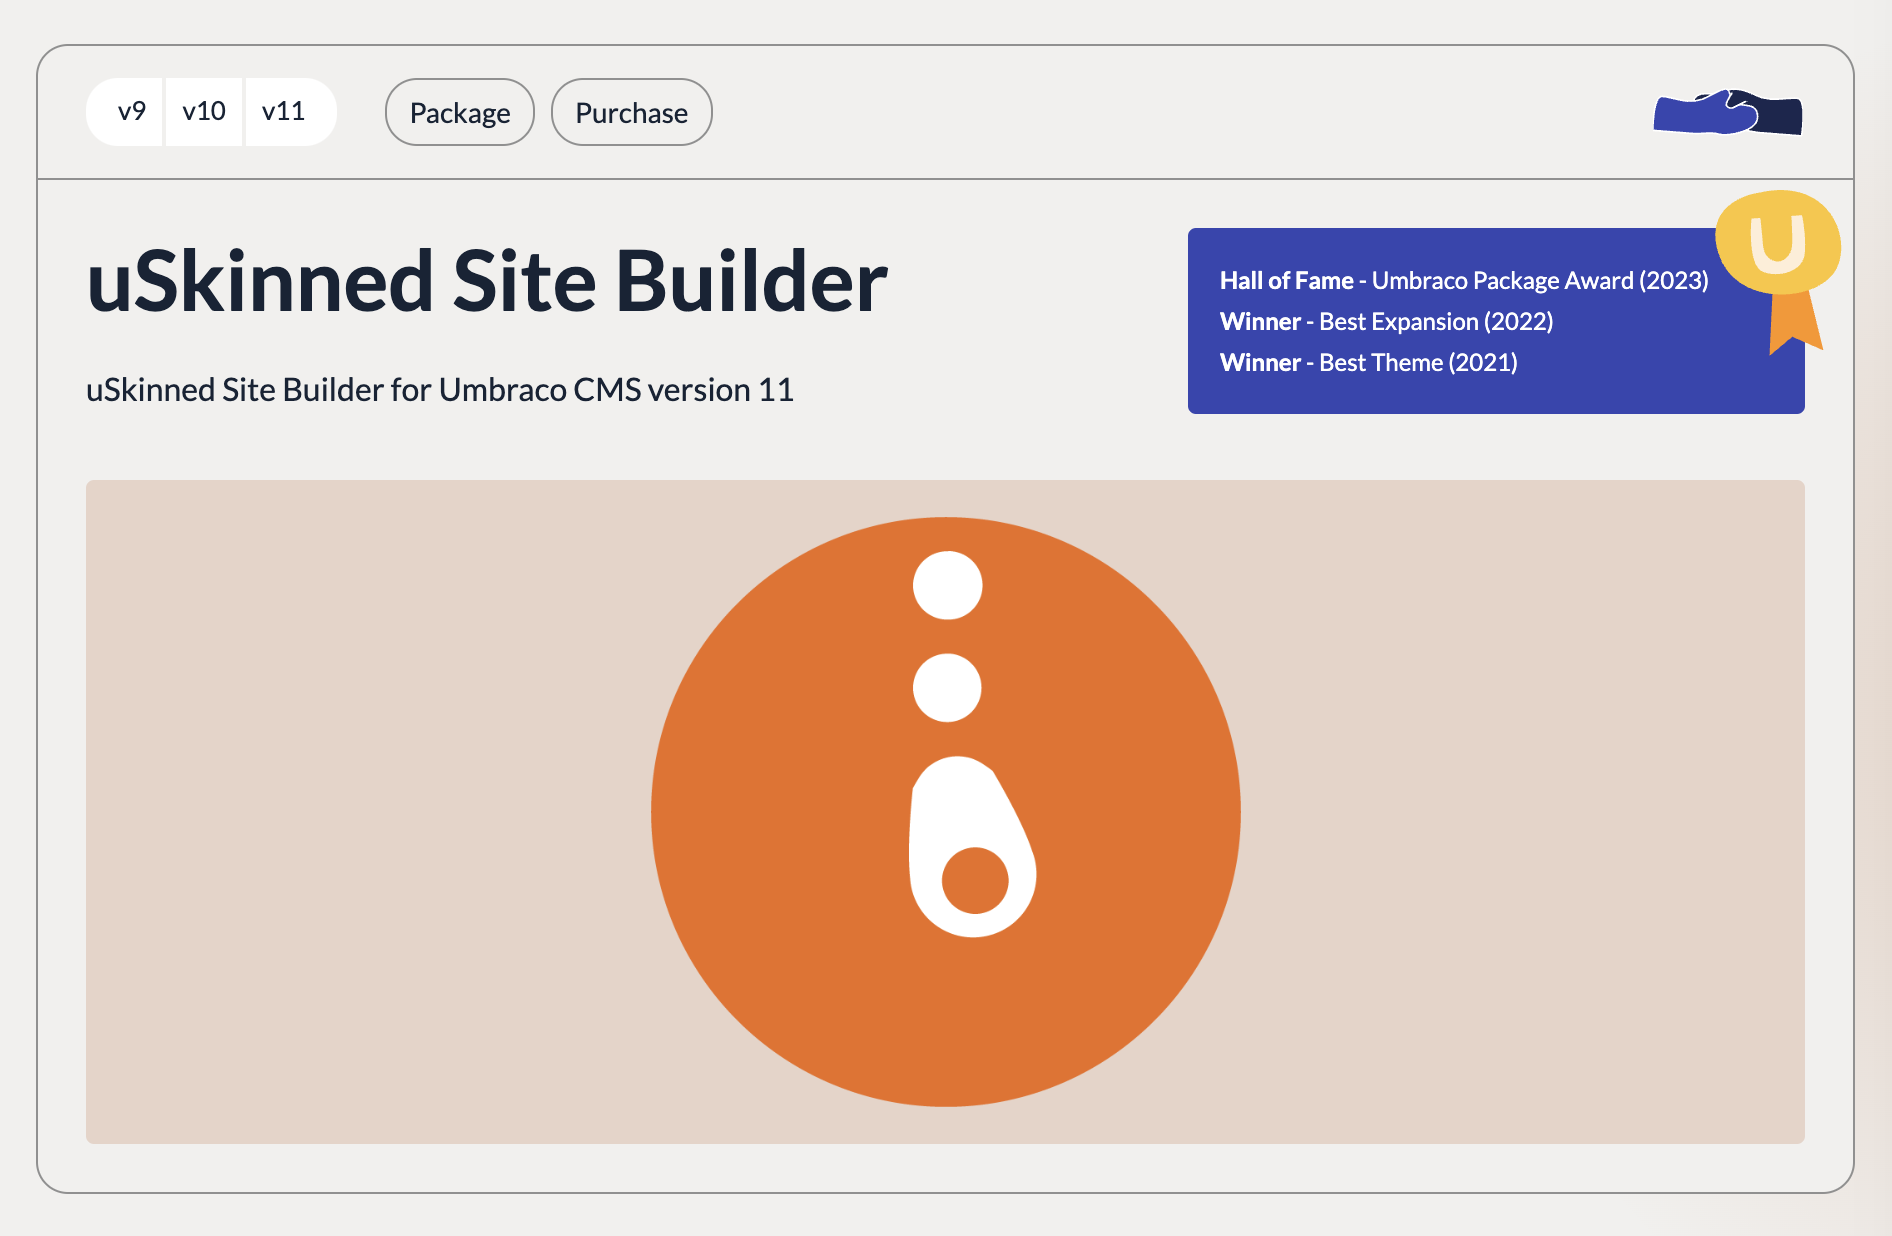 uSkinned Site Builder featured on the Umbraco Marketplace.